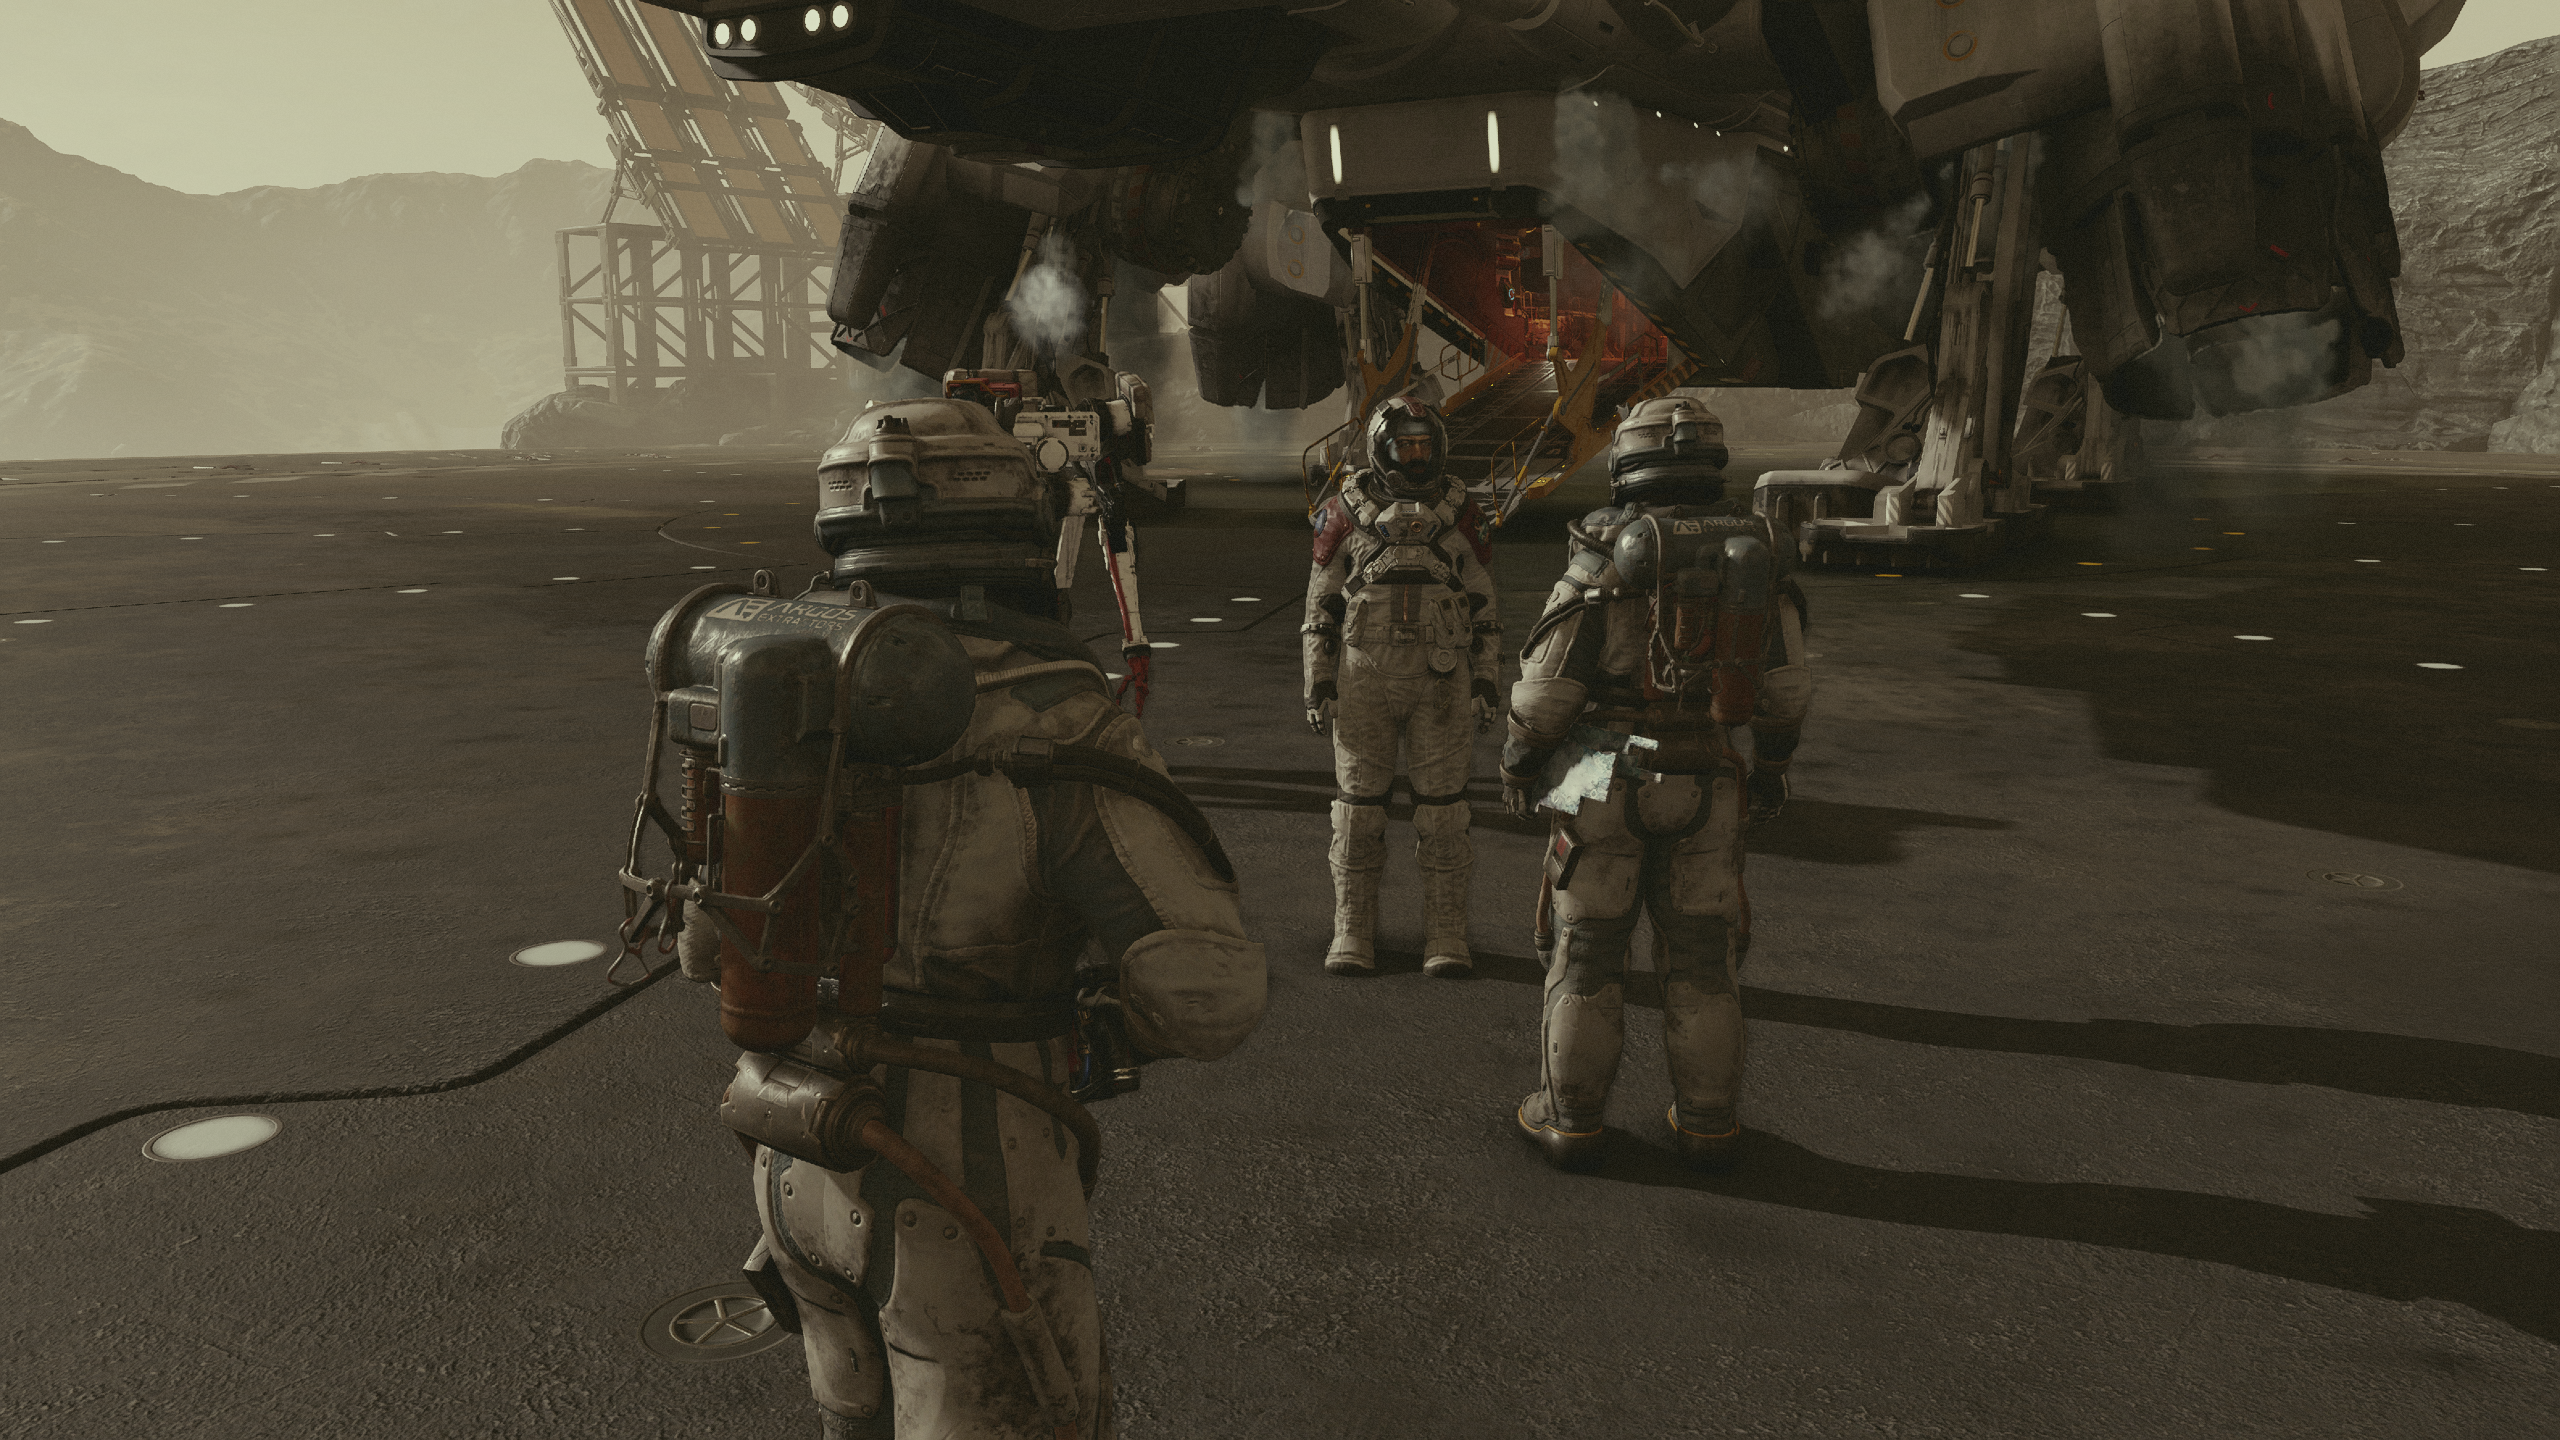 Three characters clad in spacesuits meet up in front of a spaceship at a docking bay in Starfield